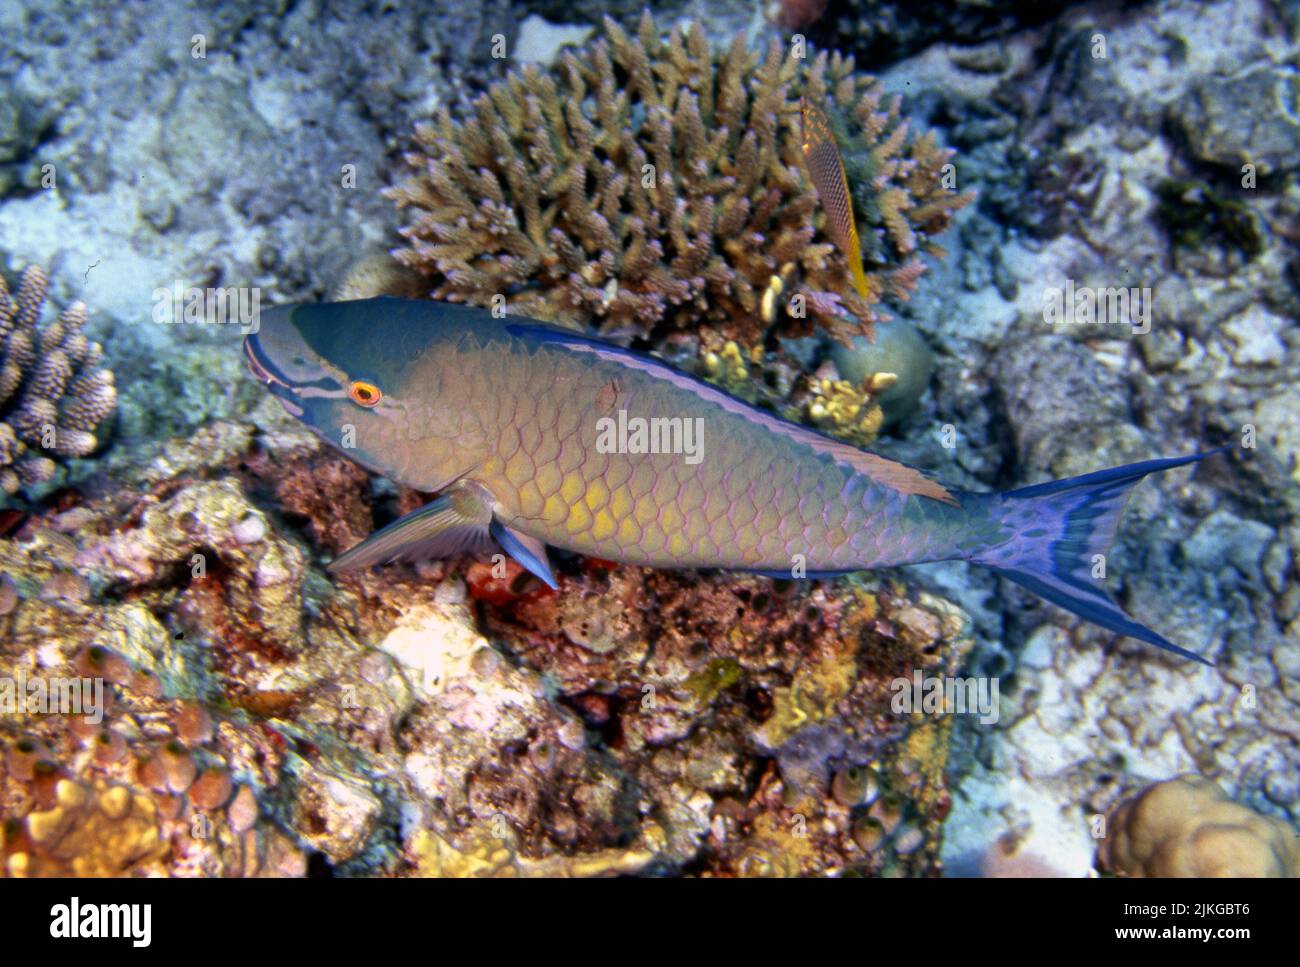 Ember parrotfish (Scarus rubroviolaceus) from the Maldives. Stock Photo